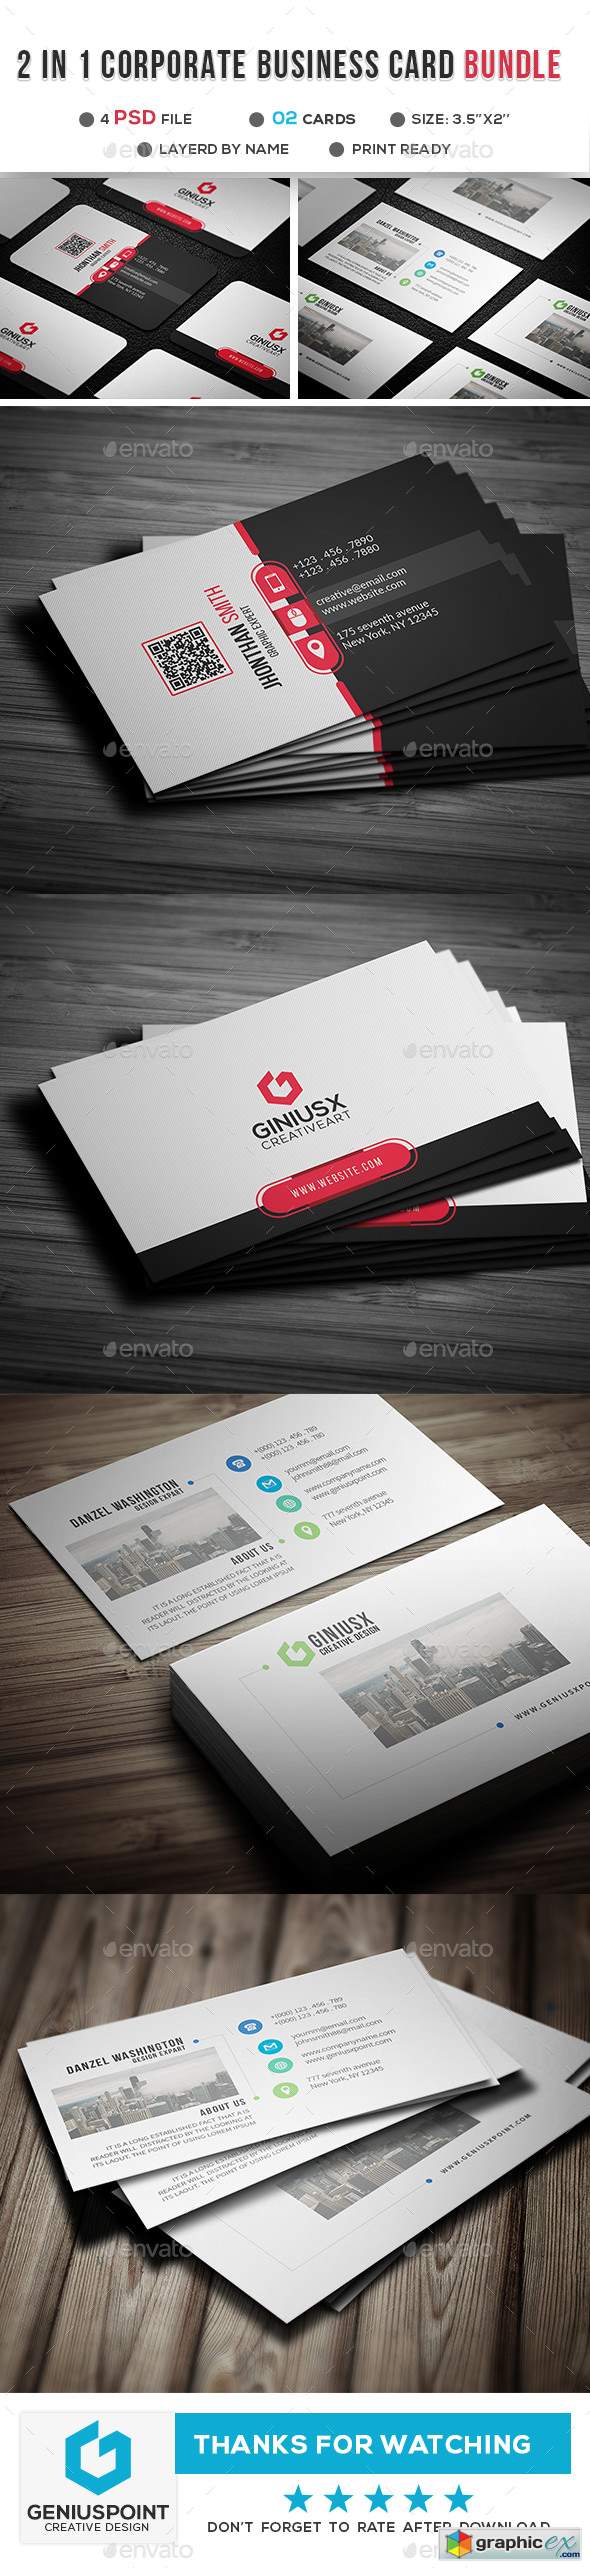 2 in 1 Business Card Bundle 22865394